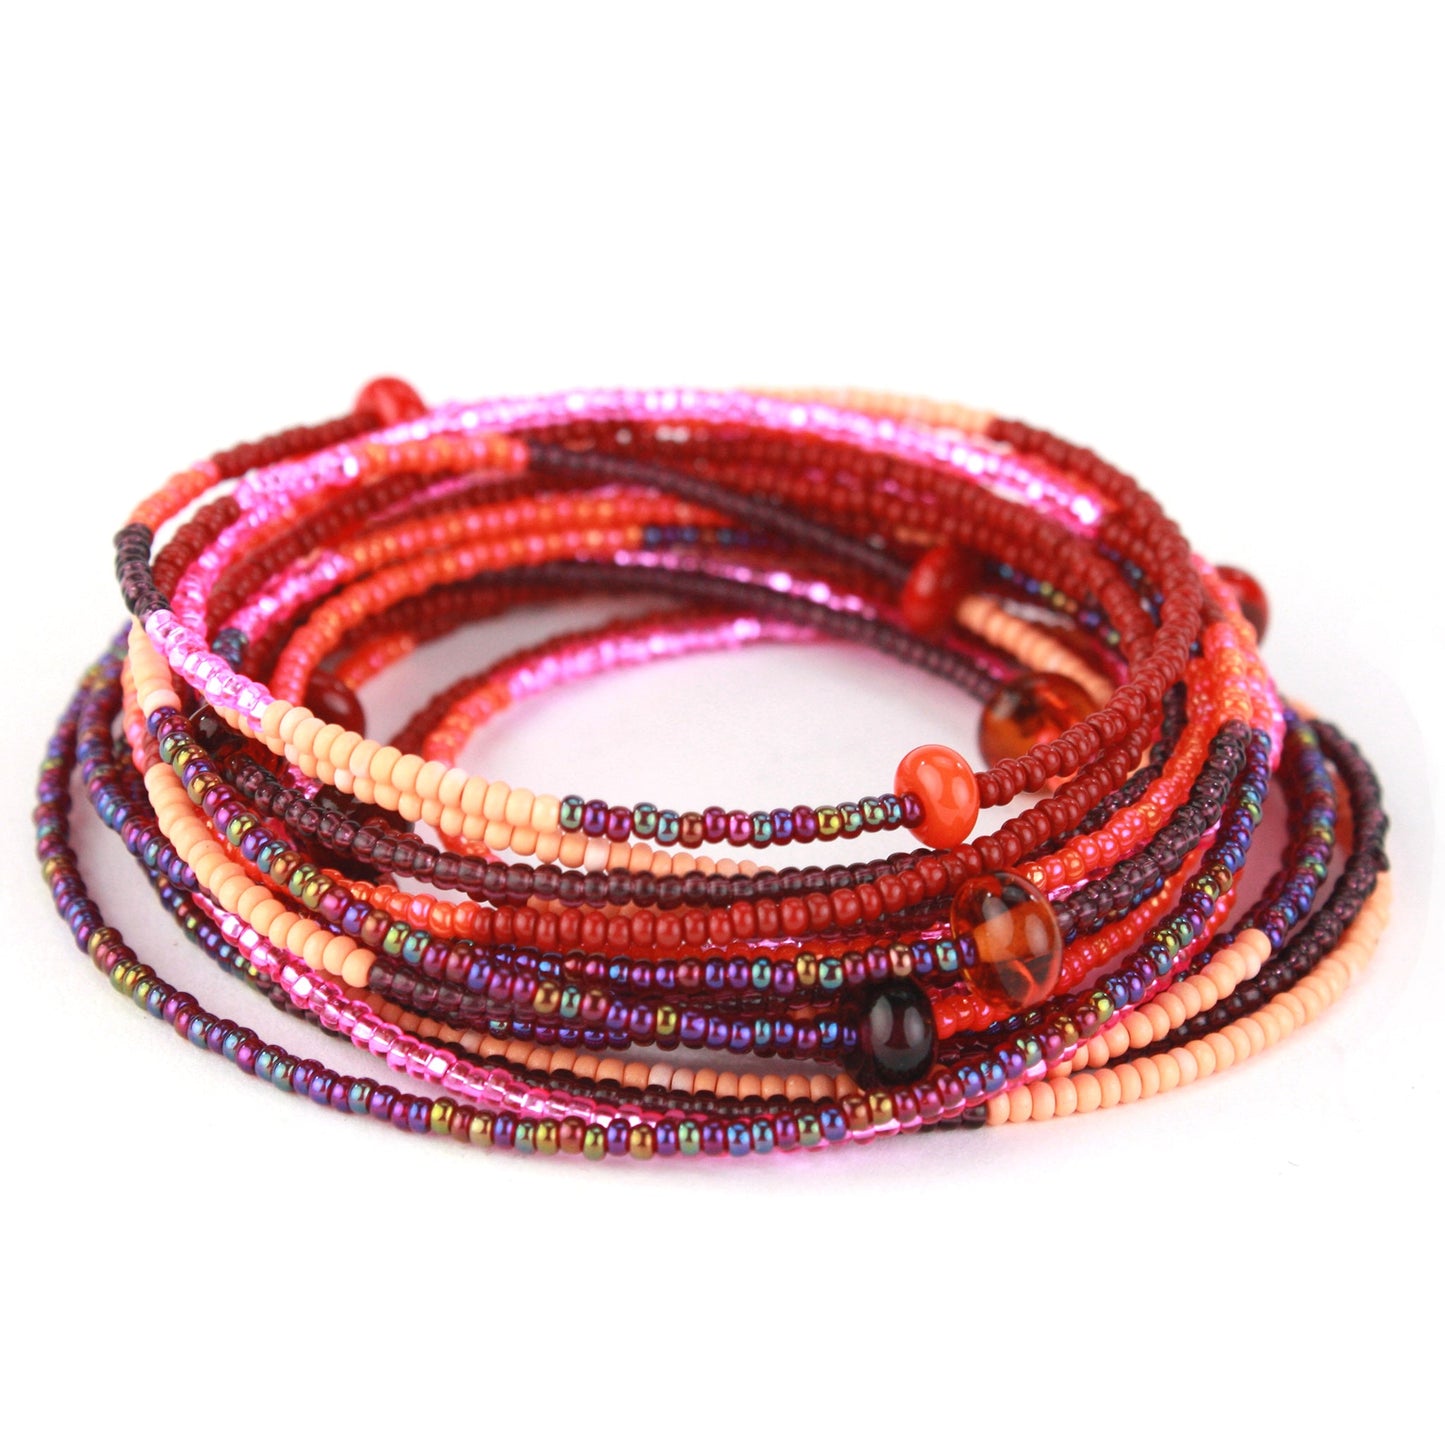 12 foot necklace - Reds, oranges and pinks